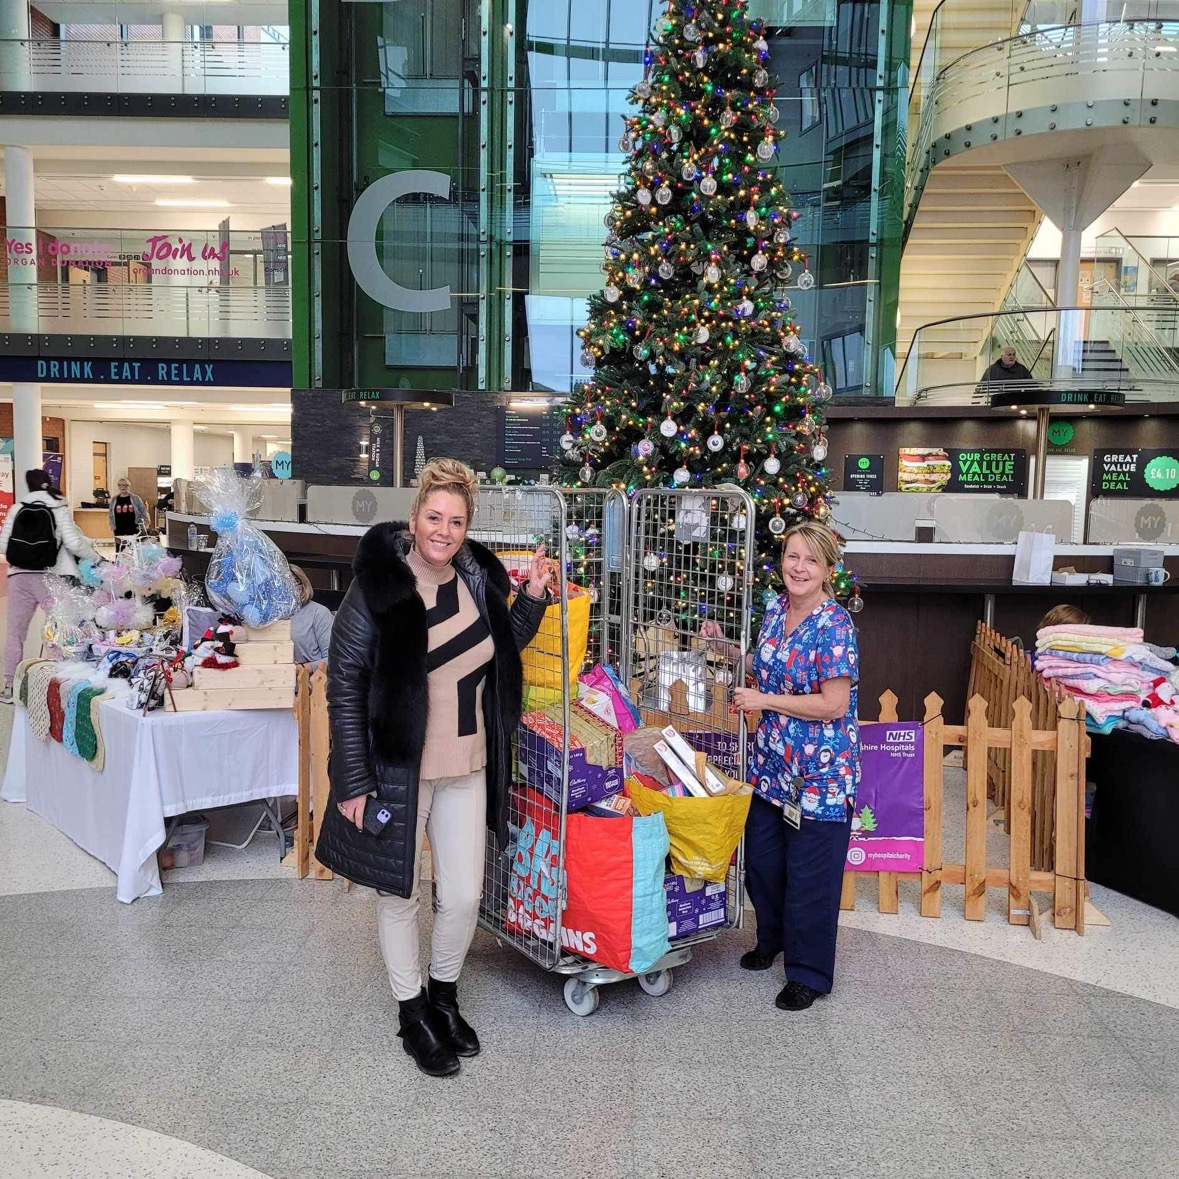 🌈Children's Joy Tradition🌈 A special thank you to Zoey Gaitley for her unwavering generosity, donating every year to the Children's Ward. Her continued support brings smiles and comfort to the young hearts under our care🎁